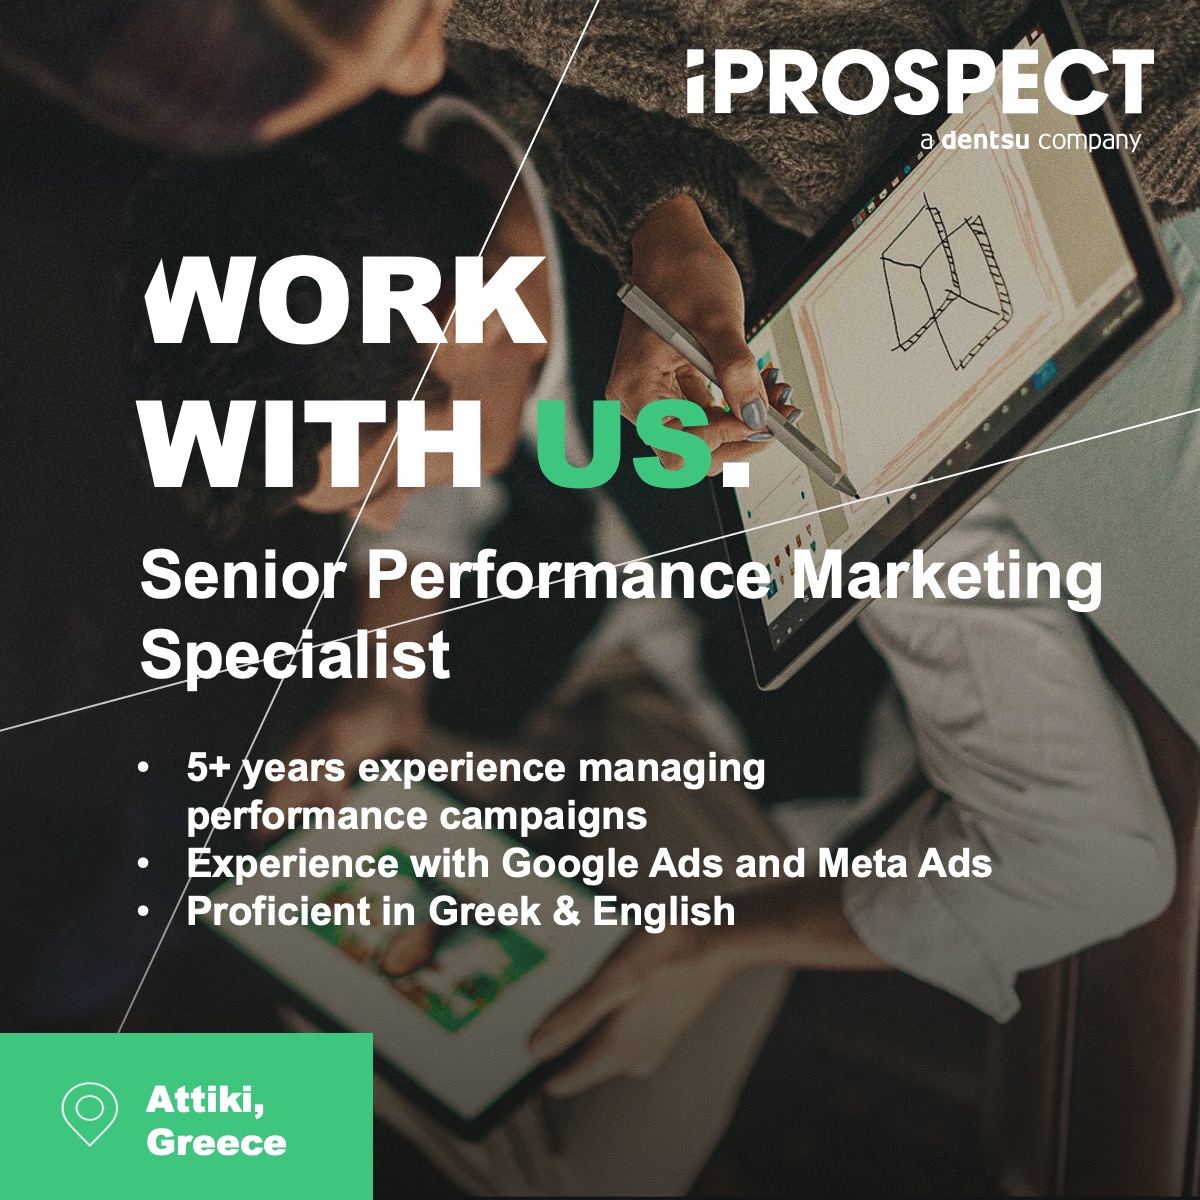 We're hiring! Are you looking for your next role as a Senior Performance Marketing Specialist in Attiki, Greece? This could be for you: ow.ly/YEff50ORLTK #werehiring #opentowork